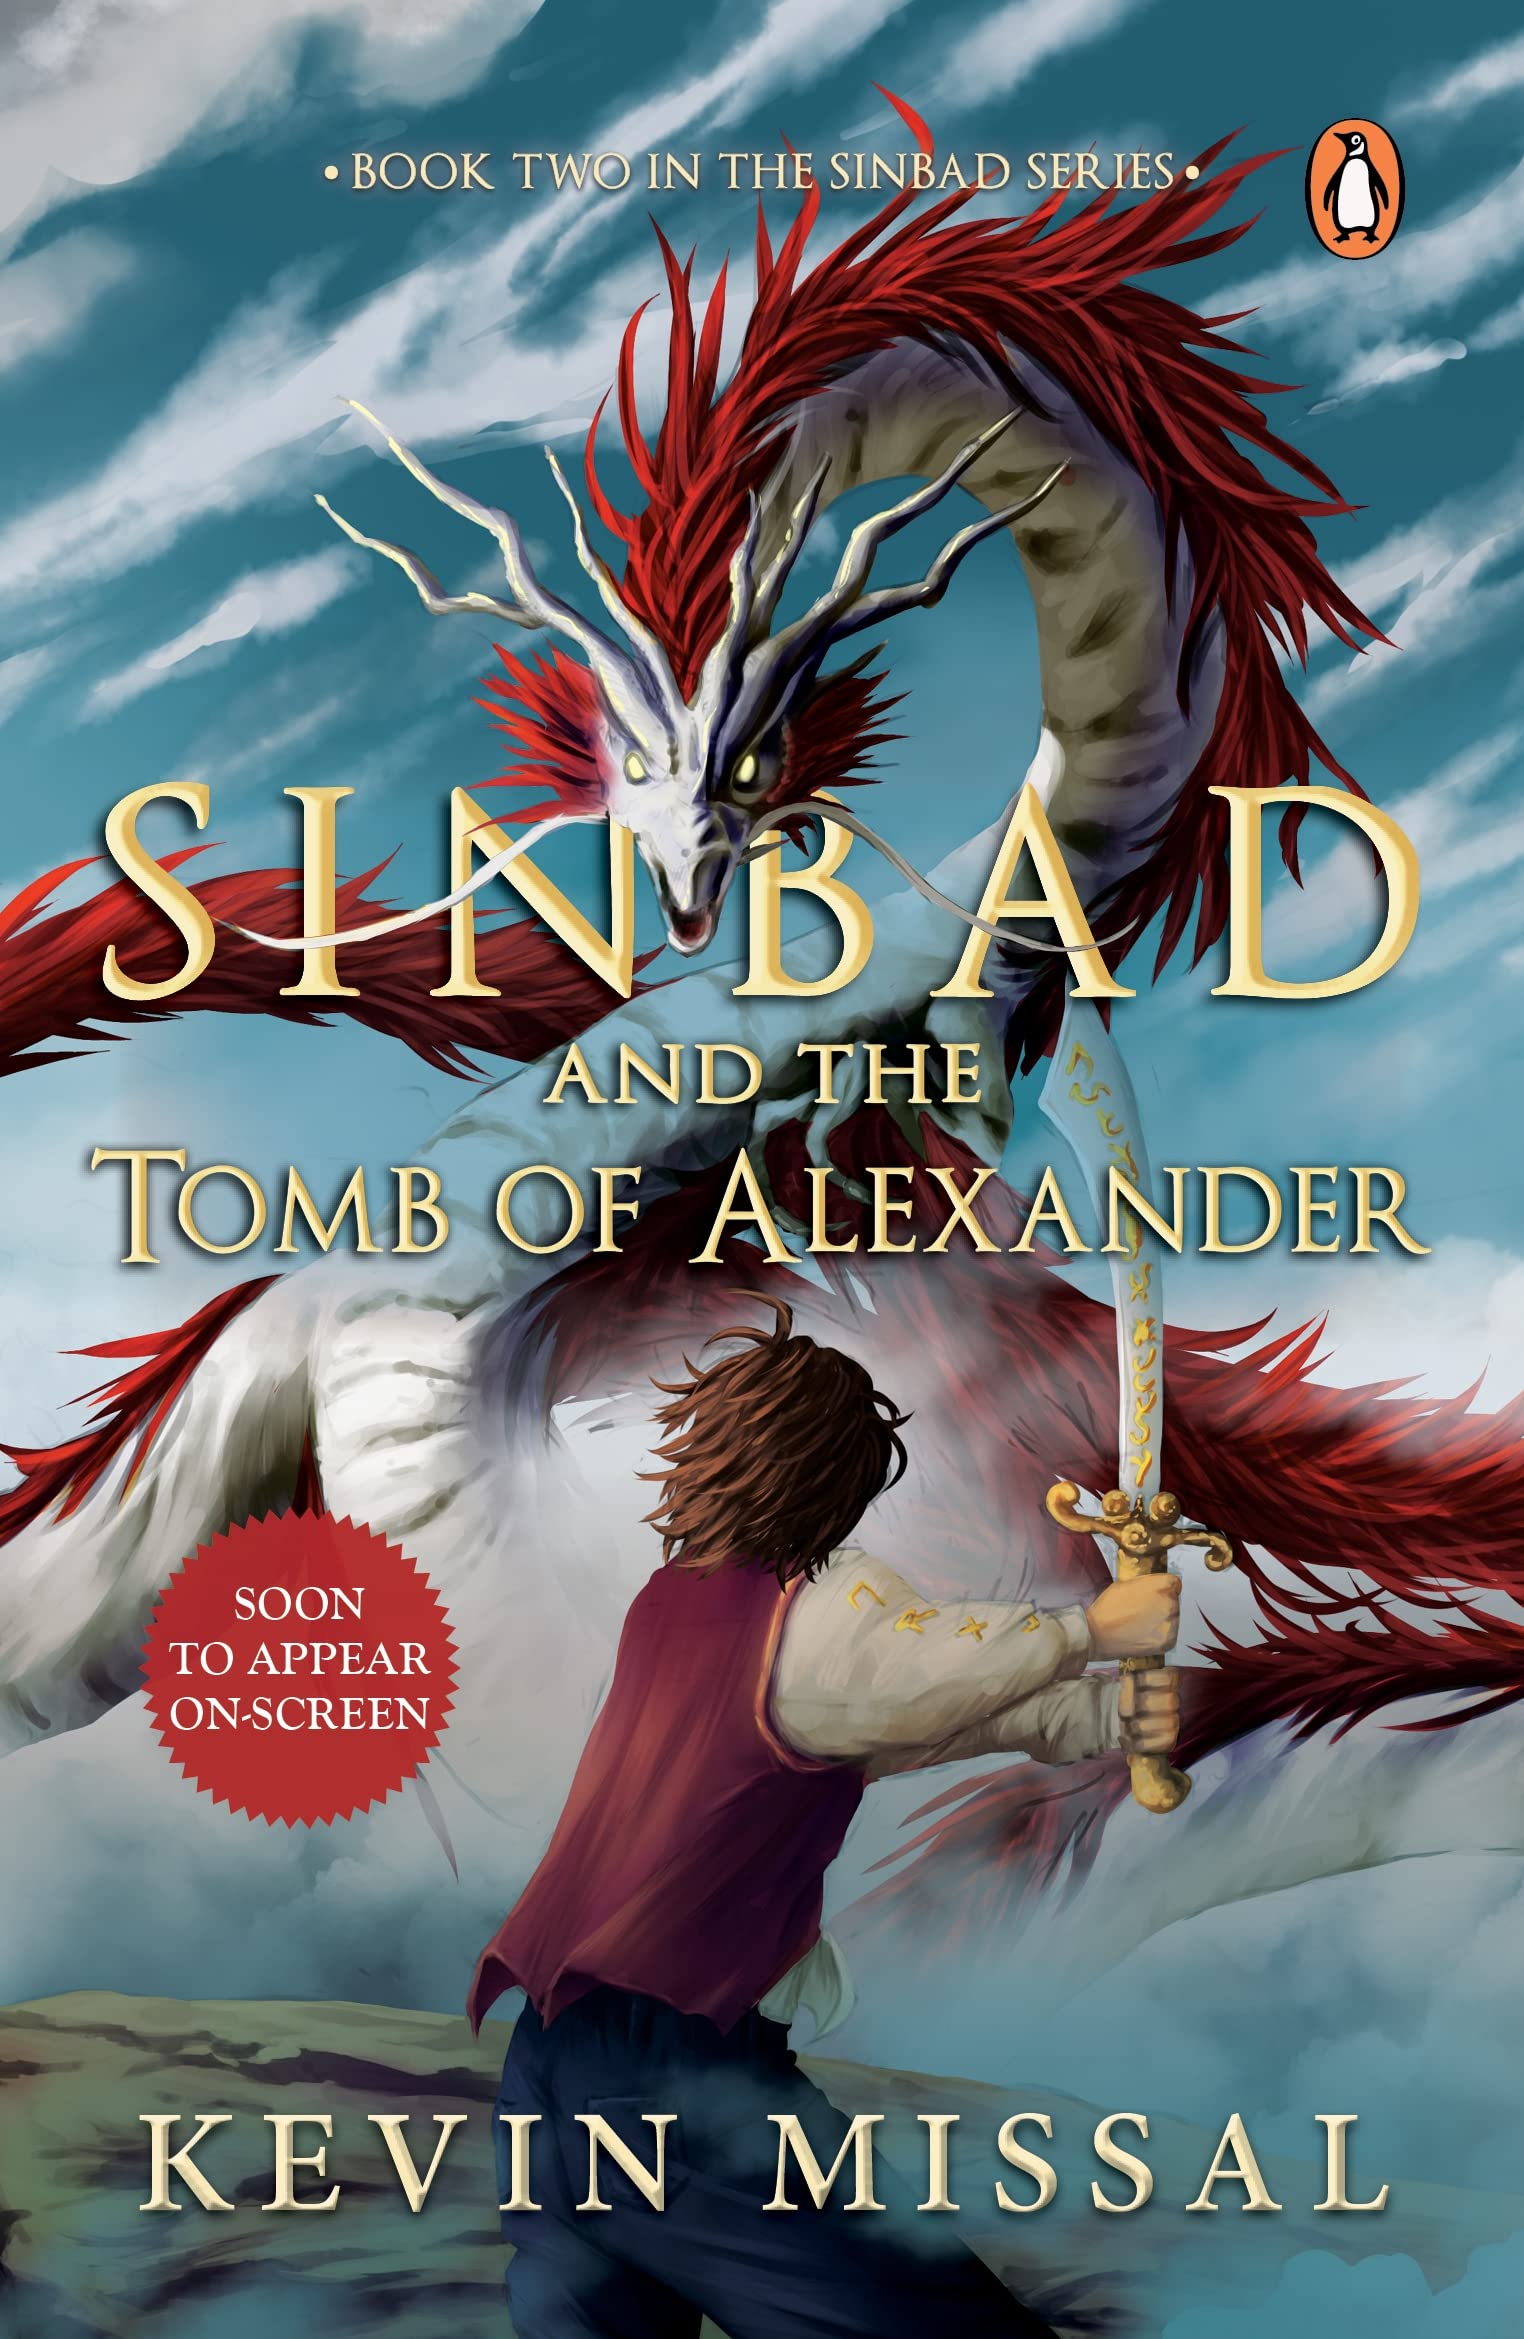 Sinbad and the Tomb of Alexander by Kevin Missal